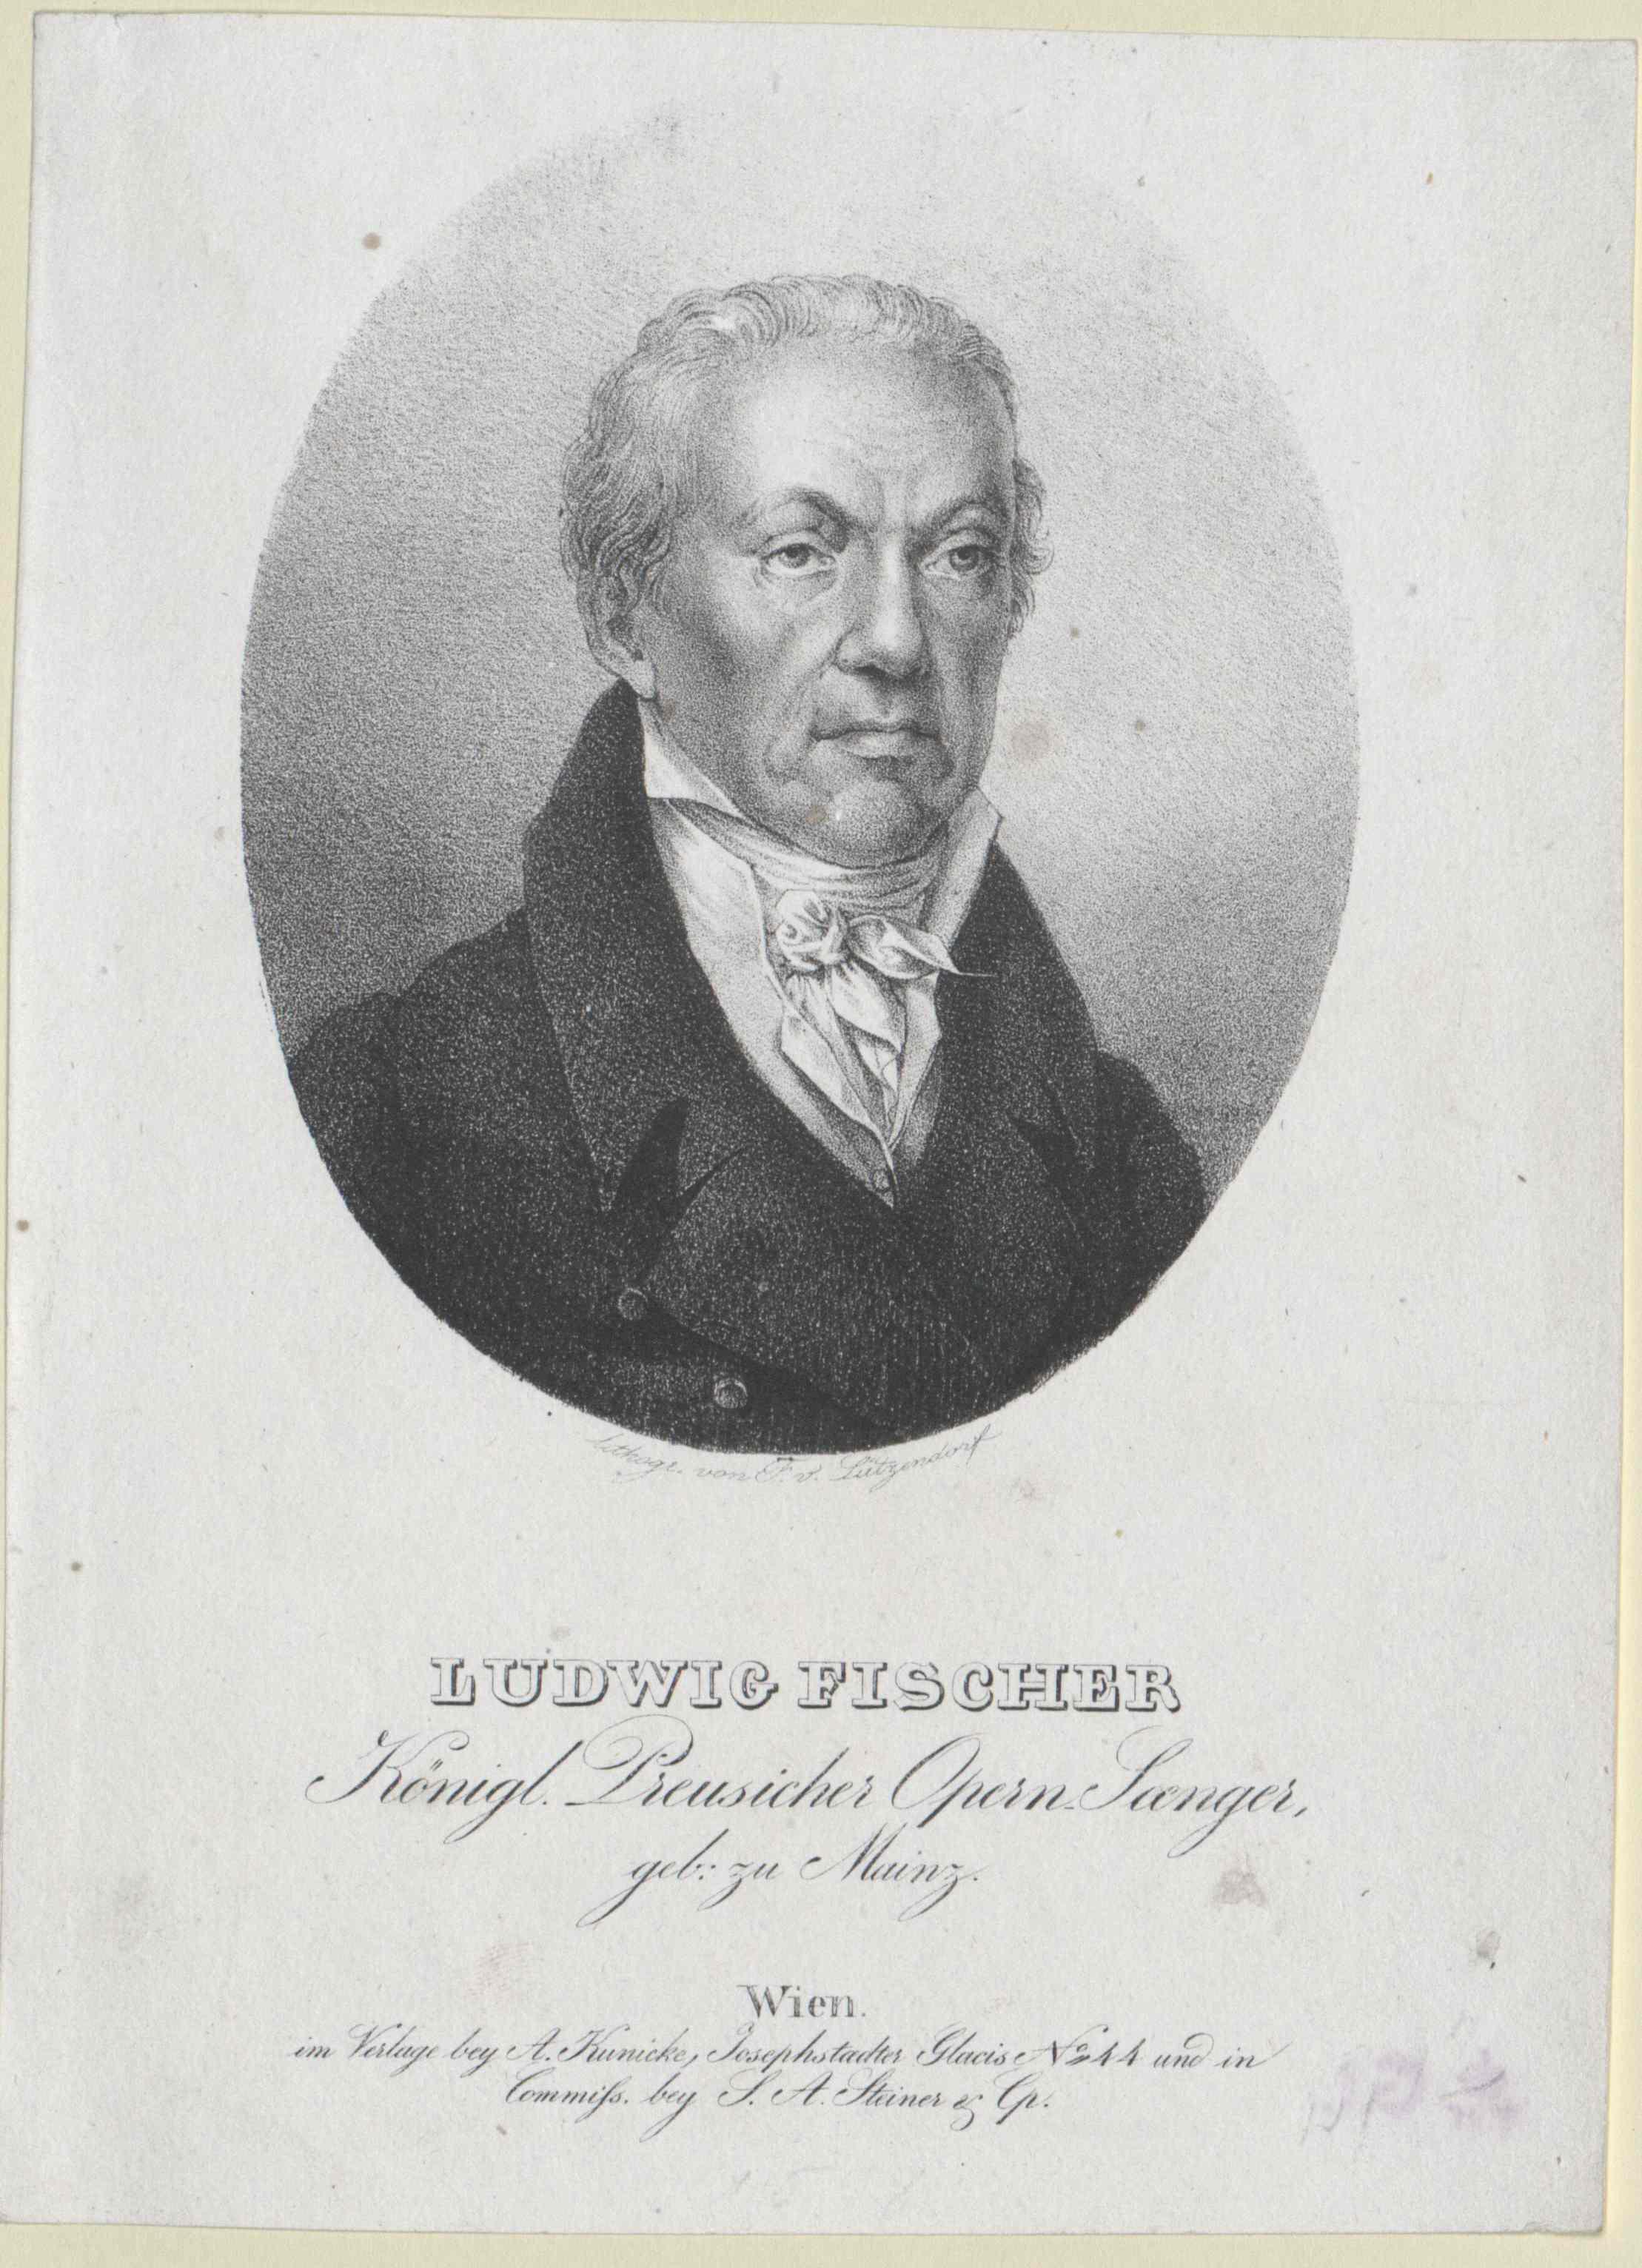 Ludwig Fischer (1745-08-18 – 1825-07-10). Operatic basses